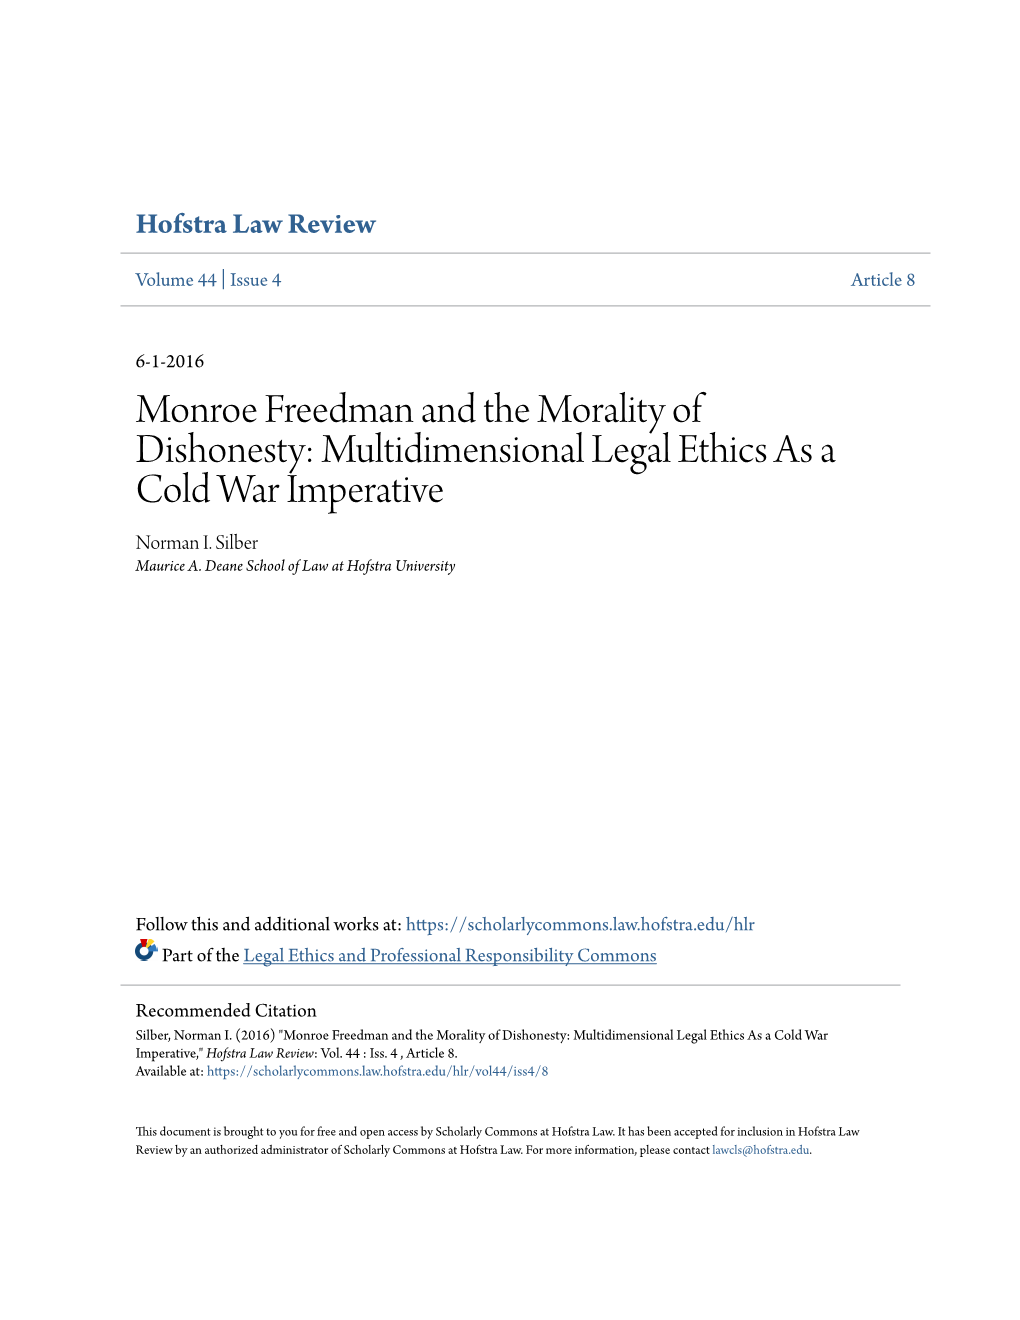 Monroe Freedman and the Morality of Dishonesty: Multidimensional Legal Ethics As a Cold War Imperative Norman I